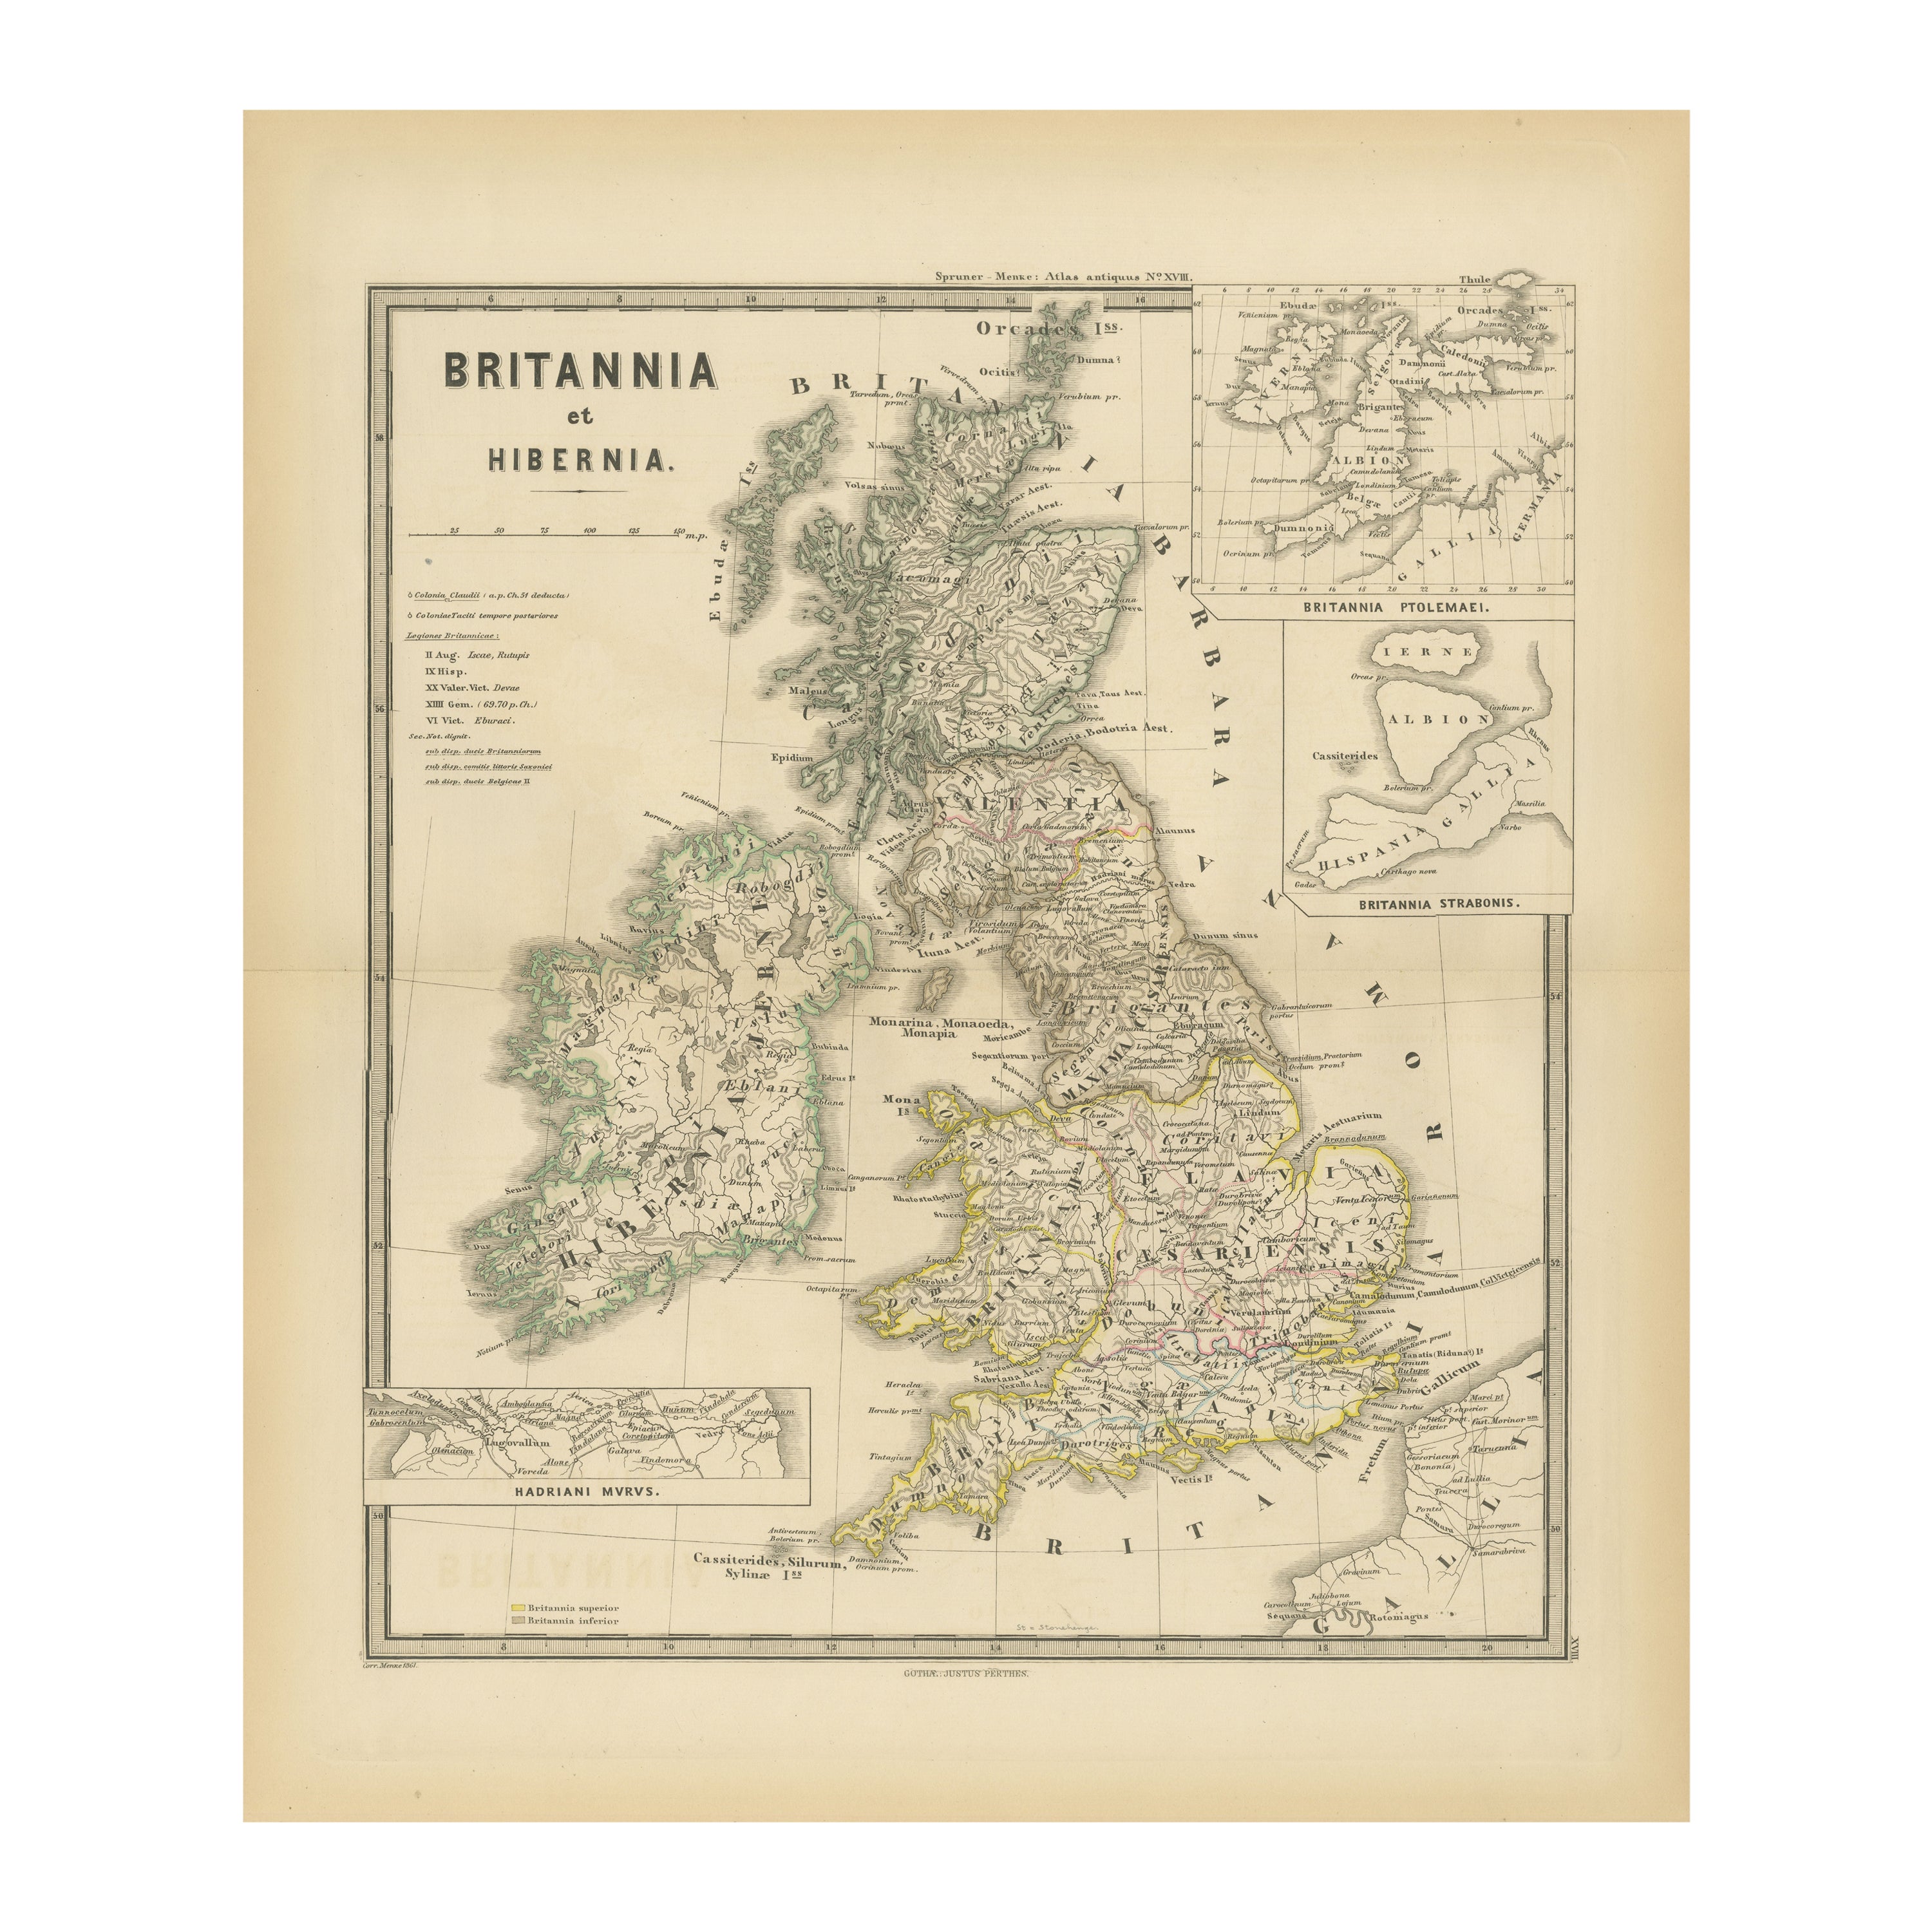 Ancient Cartography of Britannia and Hibernia, Published in 1880